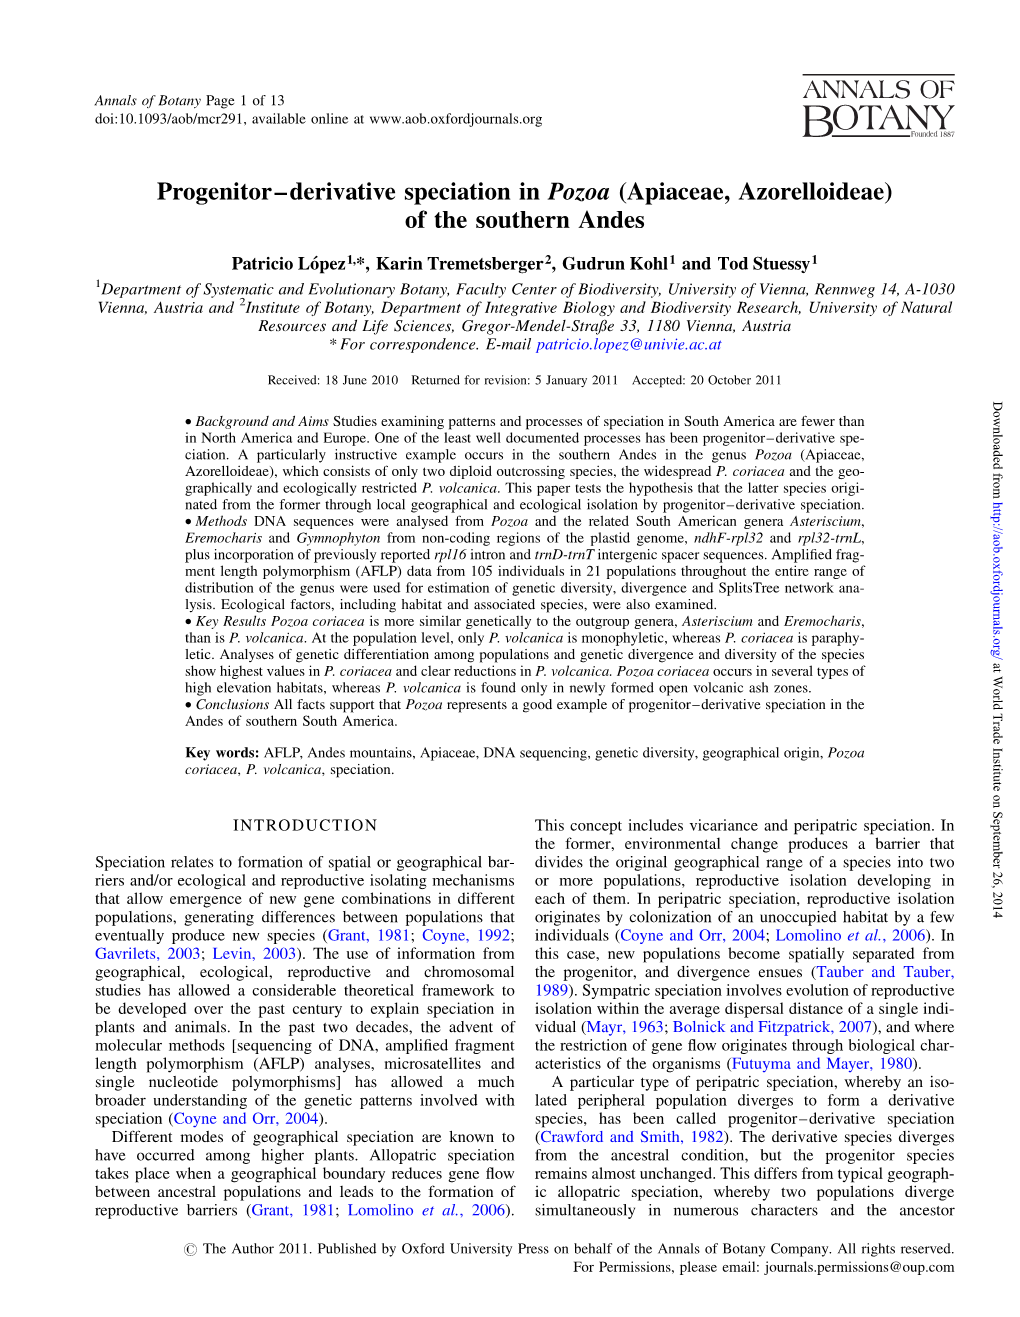 Progenitor–Derivative Speciation in Pozoa (Apiaceae, Azorelloideae) of the Southern Andes